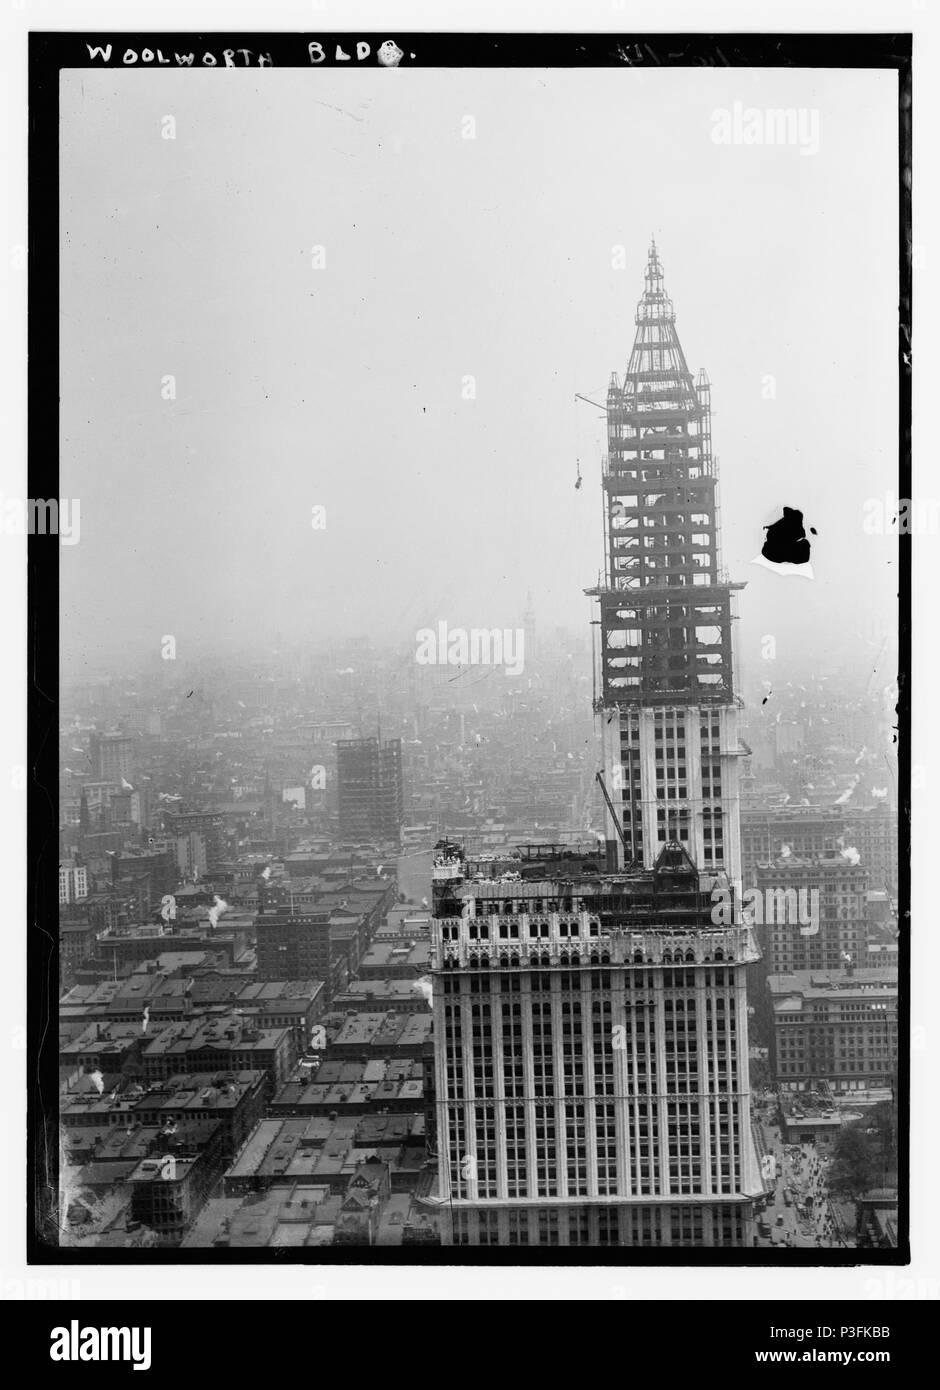 . English: The Woolworth Building in New York City under construction. This building, when opened in 1913, became the tallest building in the world and remained so until 40 Wall Street (also in New York City) opened in 1930. circa 1912. Bain News Service 4 Woolworth Building Under Construction Stock Photo